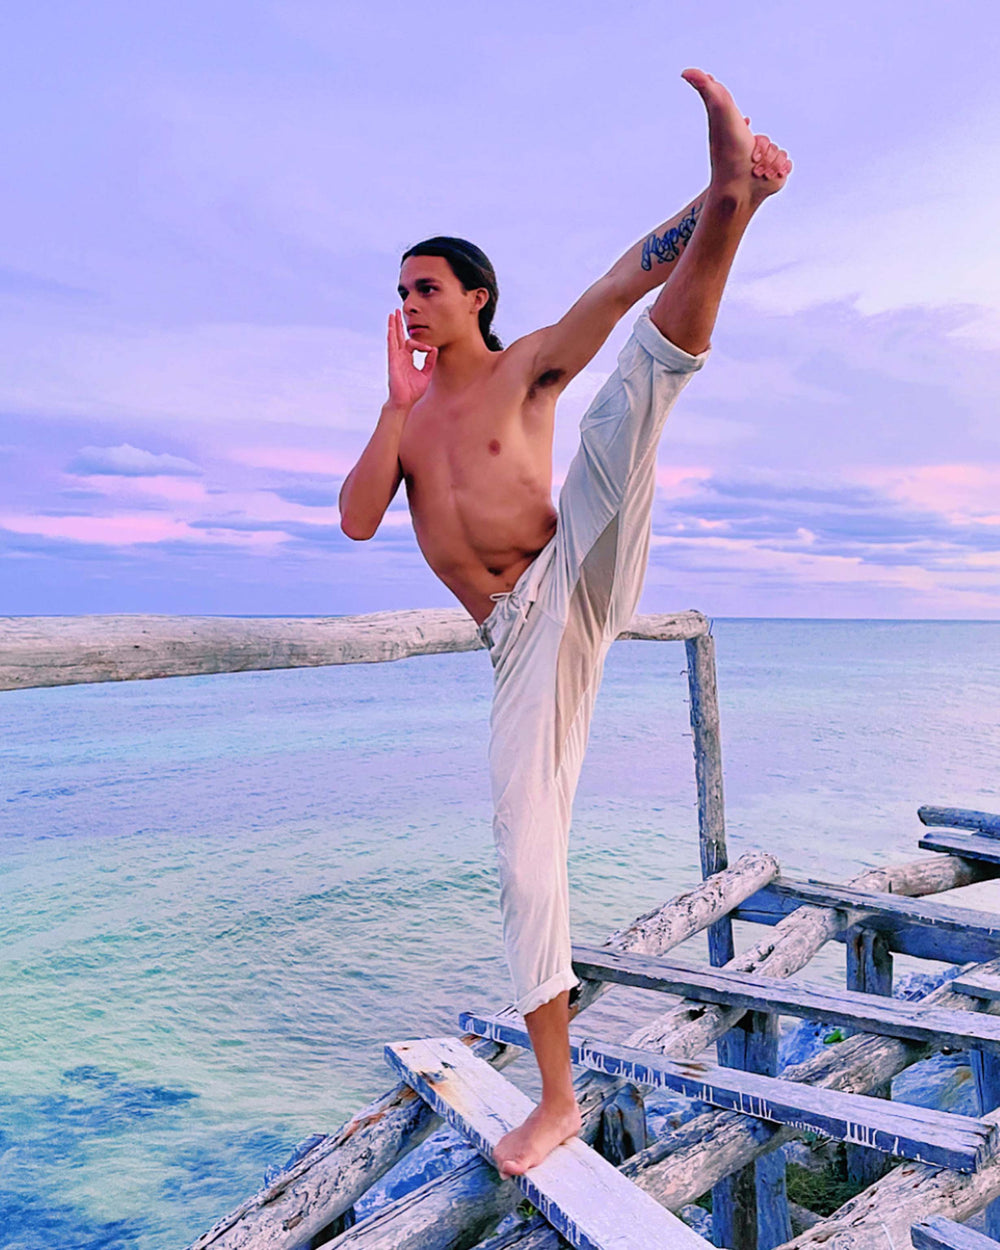 Male model is shirtless and balancing on right leg with left leg extended up above his head. He is holding his left foot with his left hand. His right hand is making a sign near his face. He is wearing natural pants. He is balancing on a board above water.